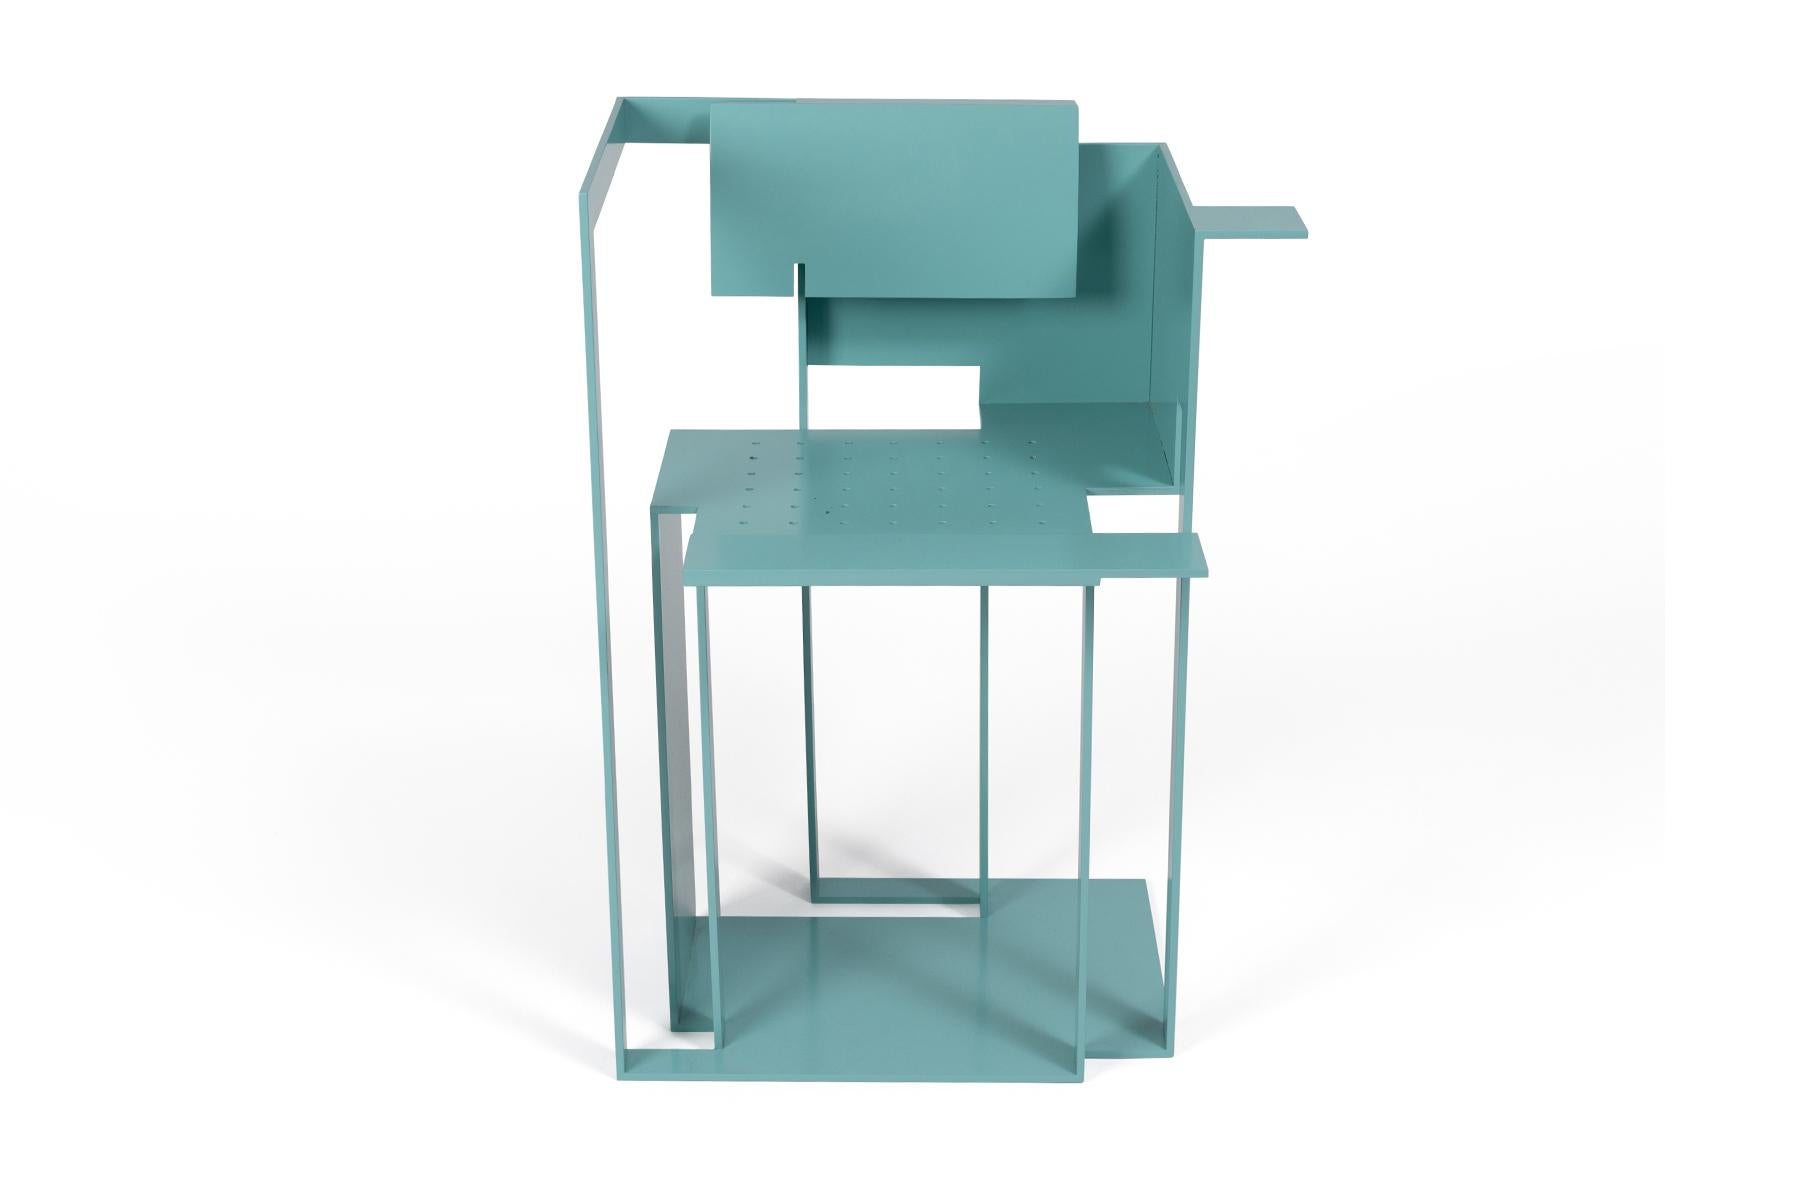 Robert Whitton one off aluminium chair, circa late 1980s. This architectural example has been newly powder coated in a bright turquoise.